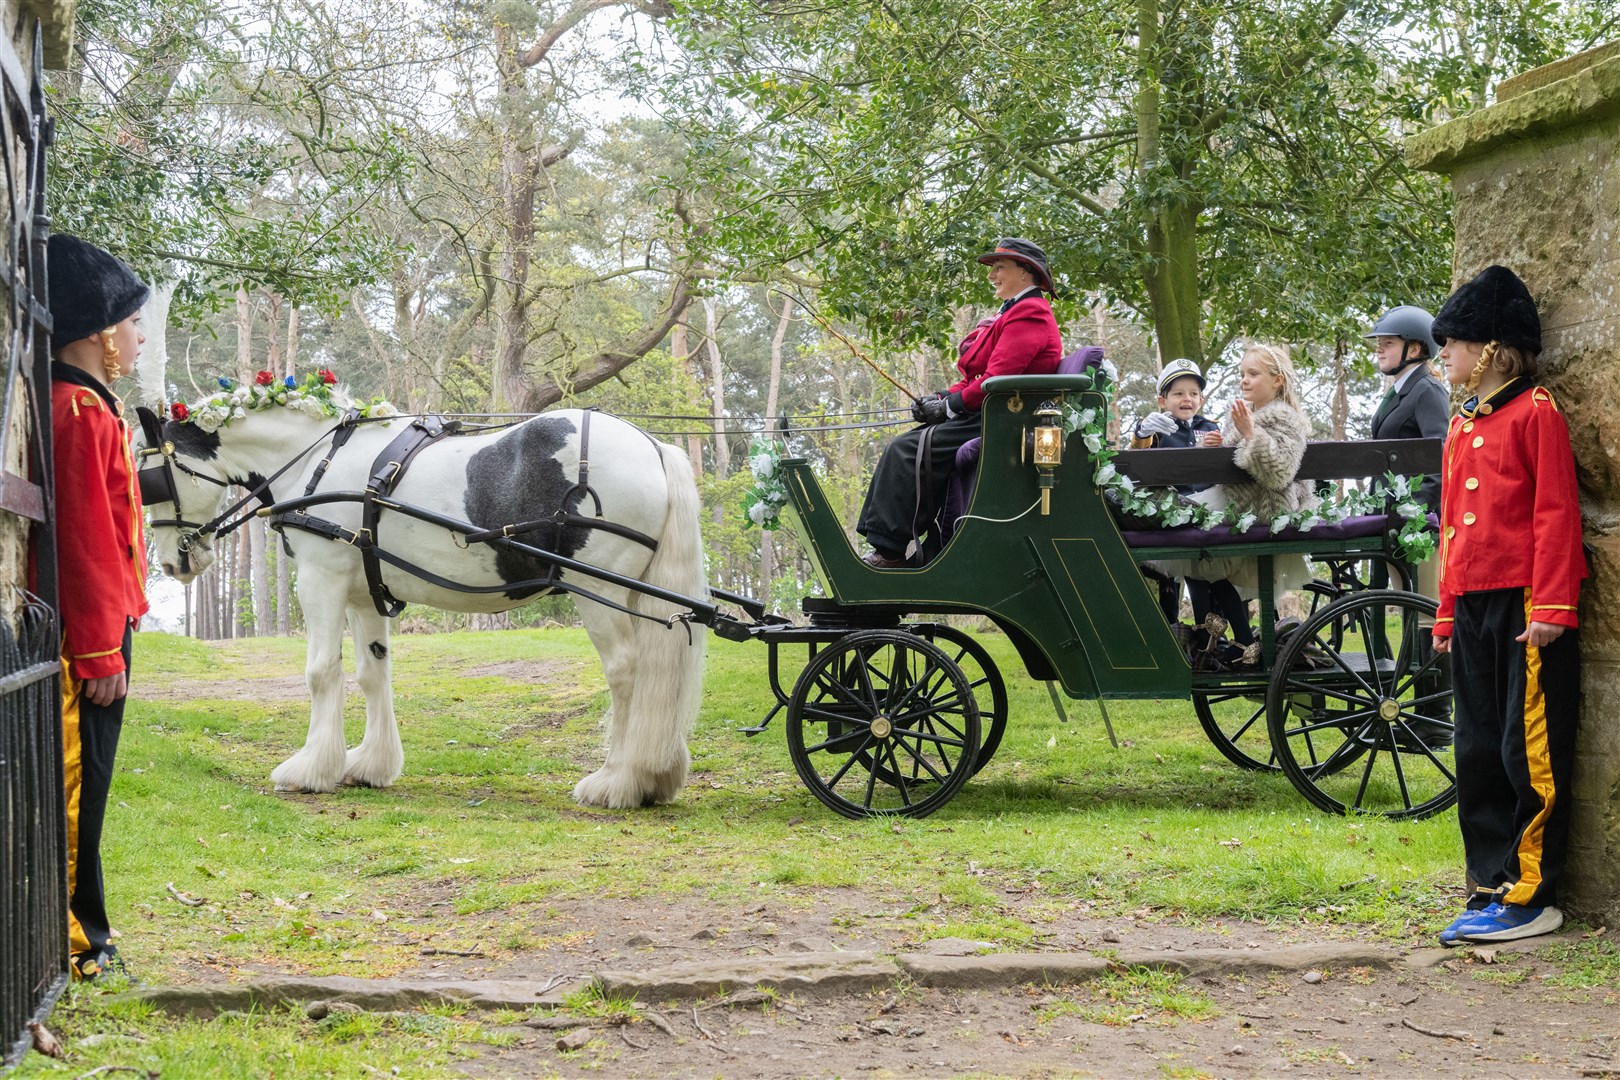 A Pony-drawn carriage took King Charles (Hamish M) and Camilla Queen Consort (Jessica C) to their Coronation. Picture: Beth Taylor